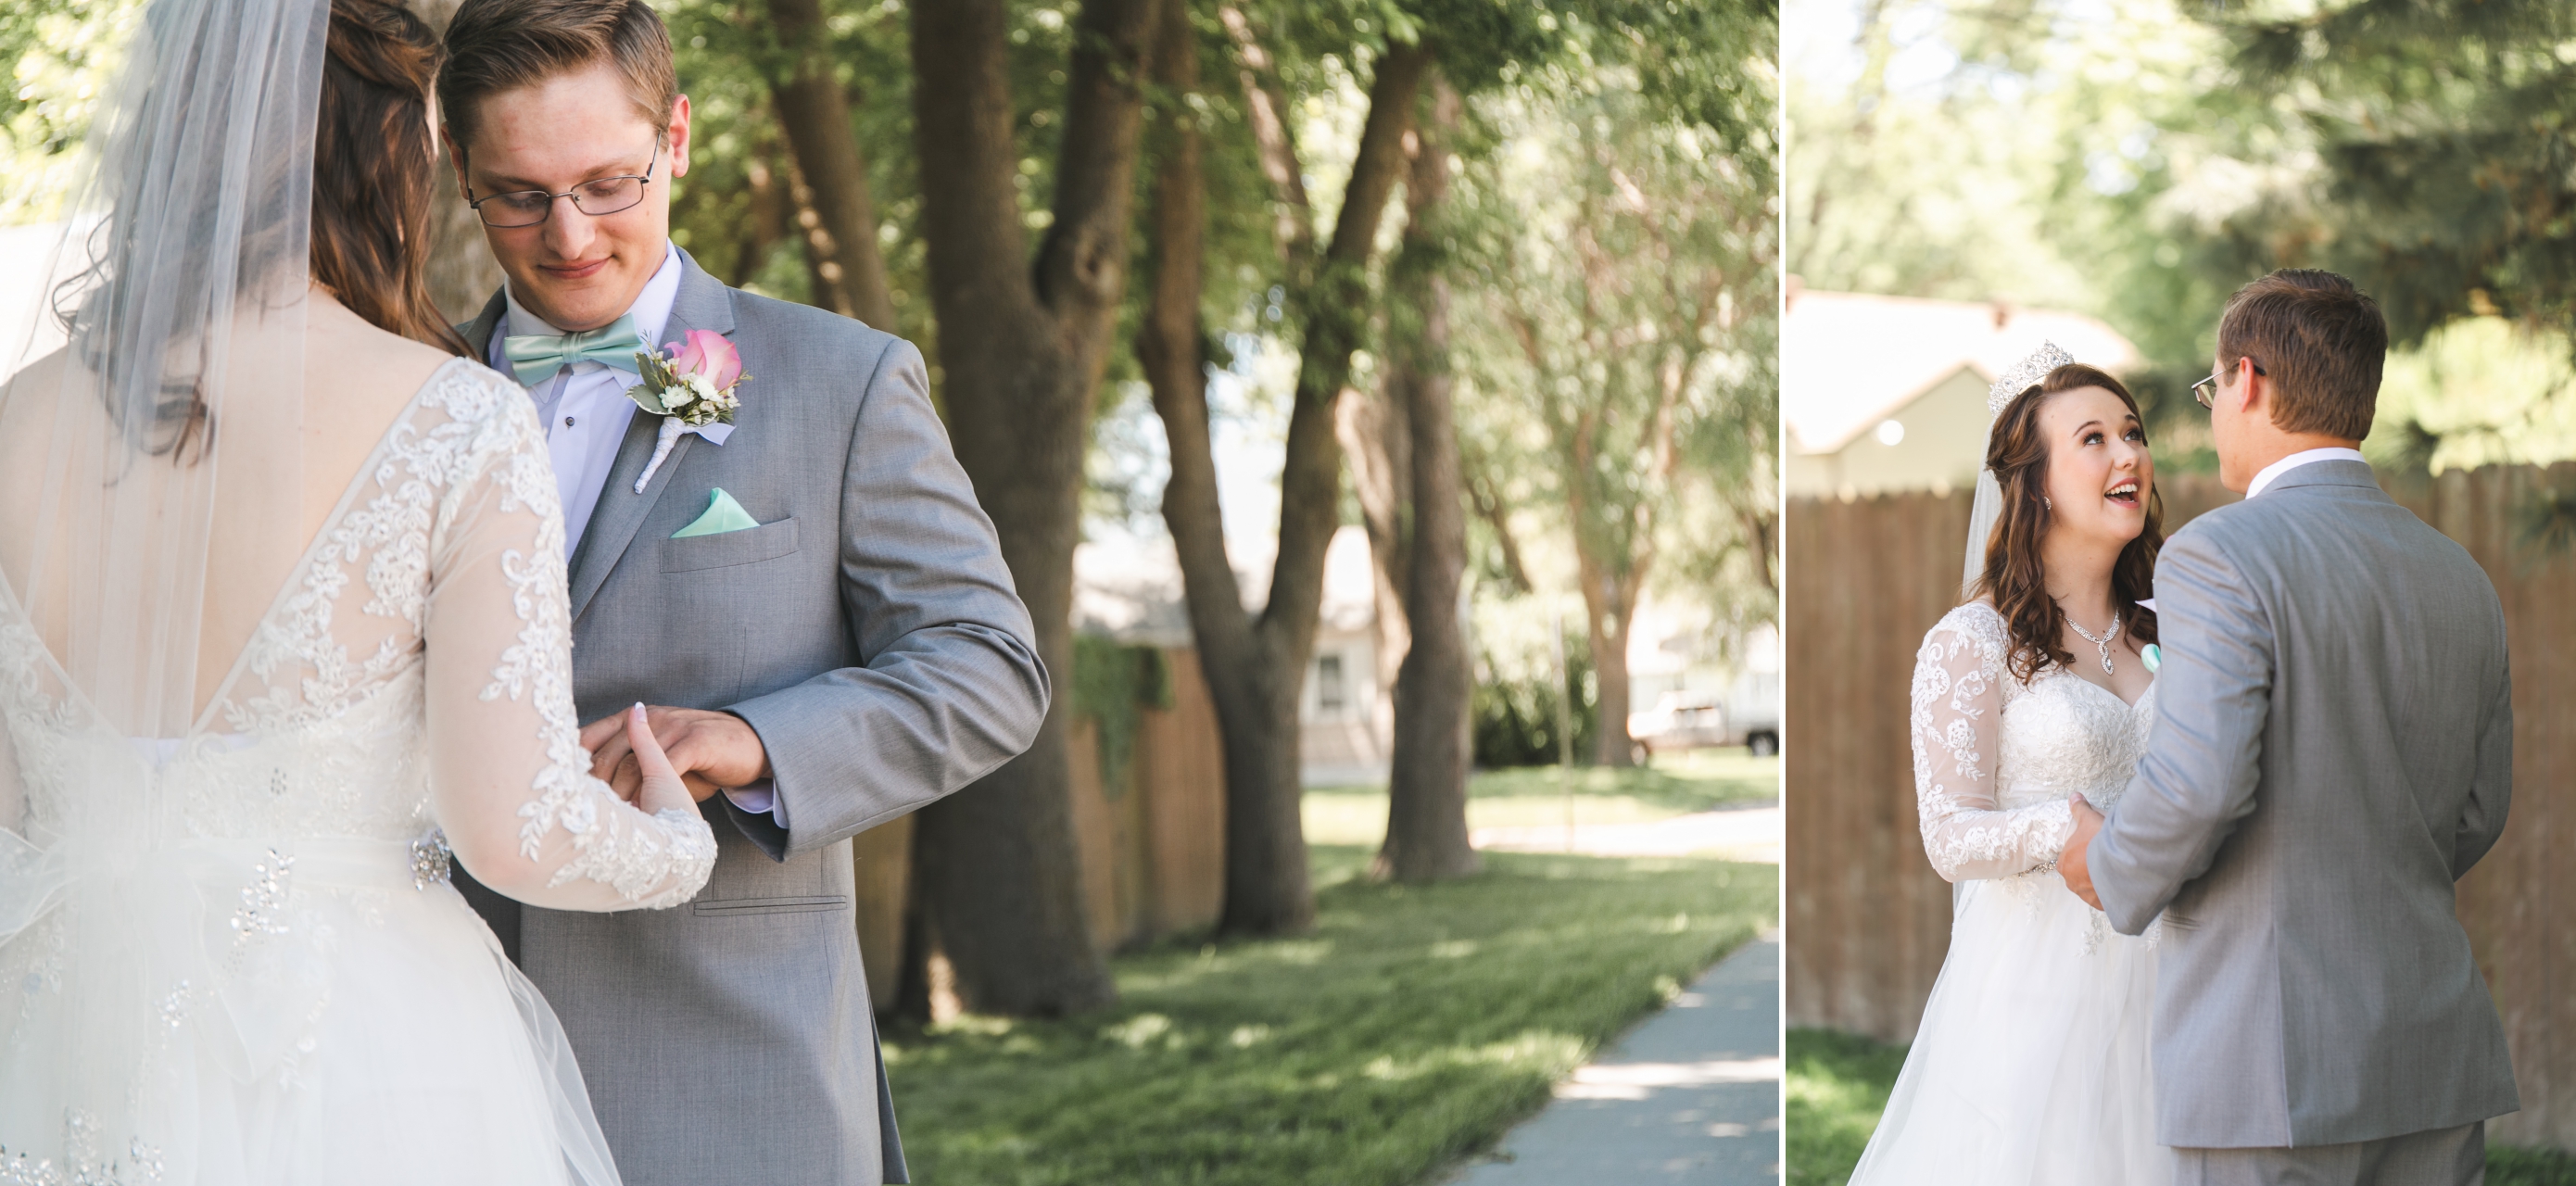 First look of couple on their wedding in Boise Idaho